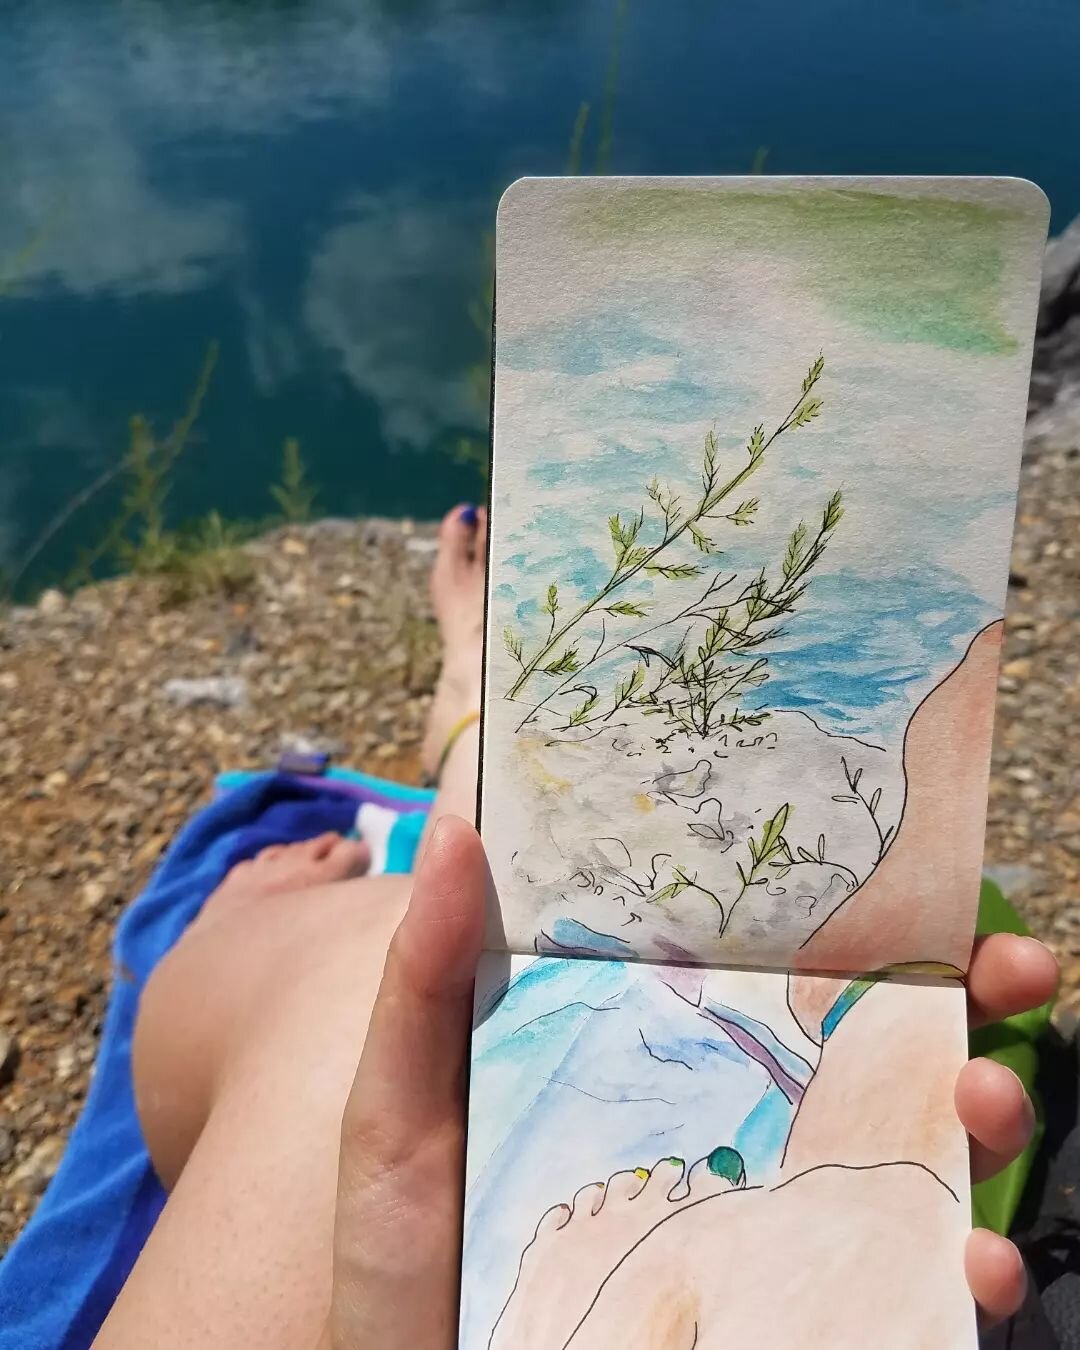 Here's hoping today is foreshadowing of how this summer will be filled. 

Swimming and walking and connecting and colors and paints and stories and flowers and rocks and movement and sunshine and water and lemonade and looking and listening and sayin